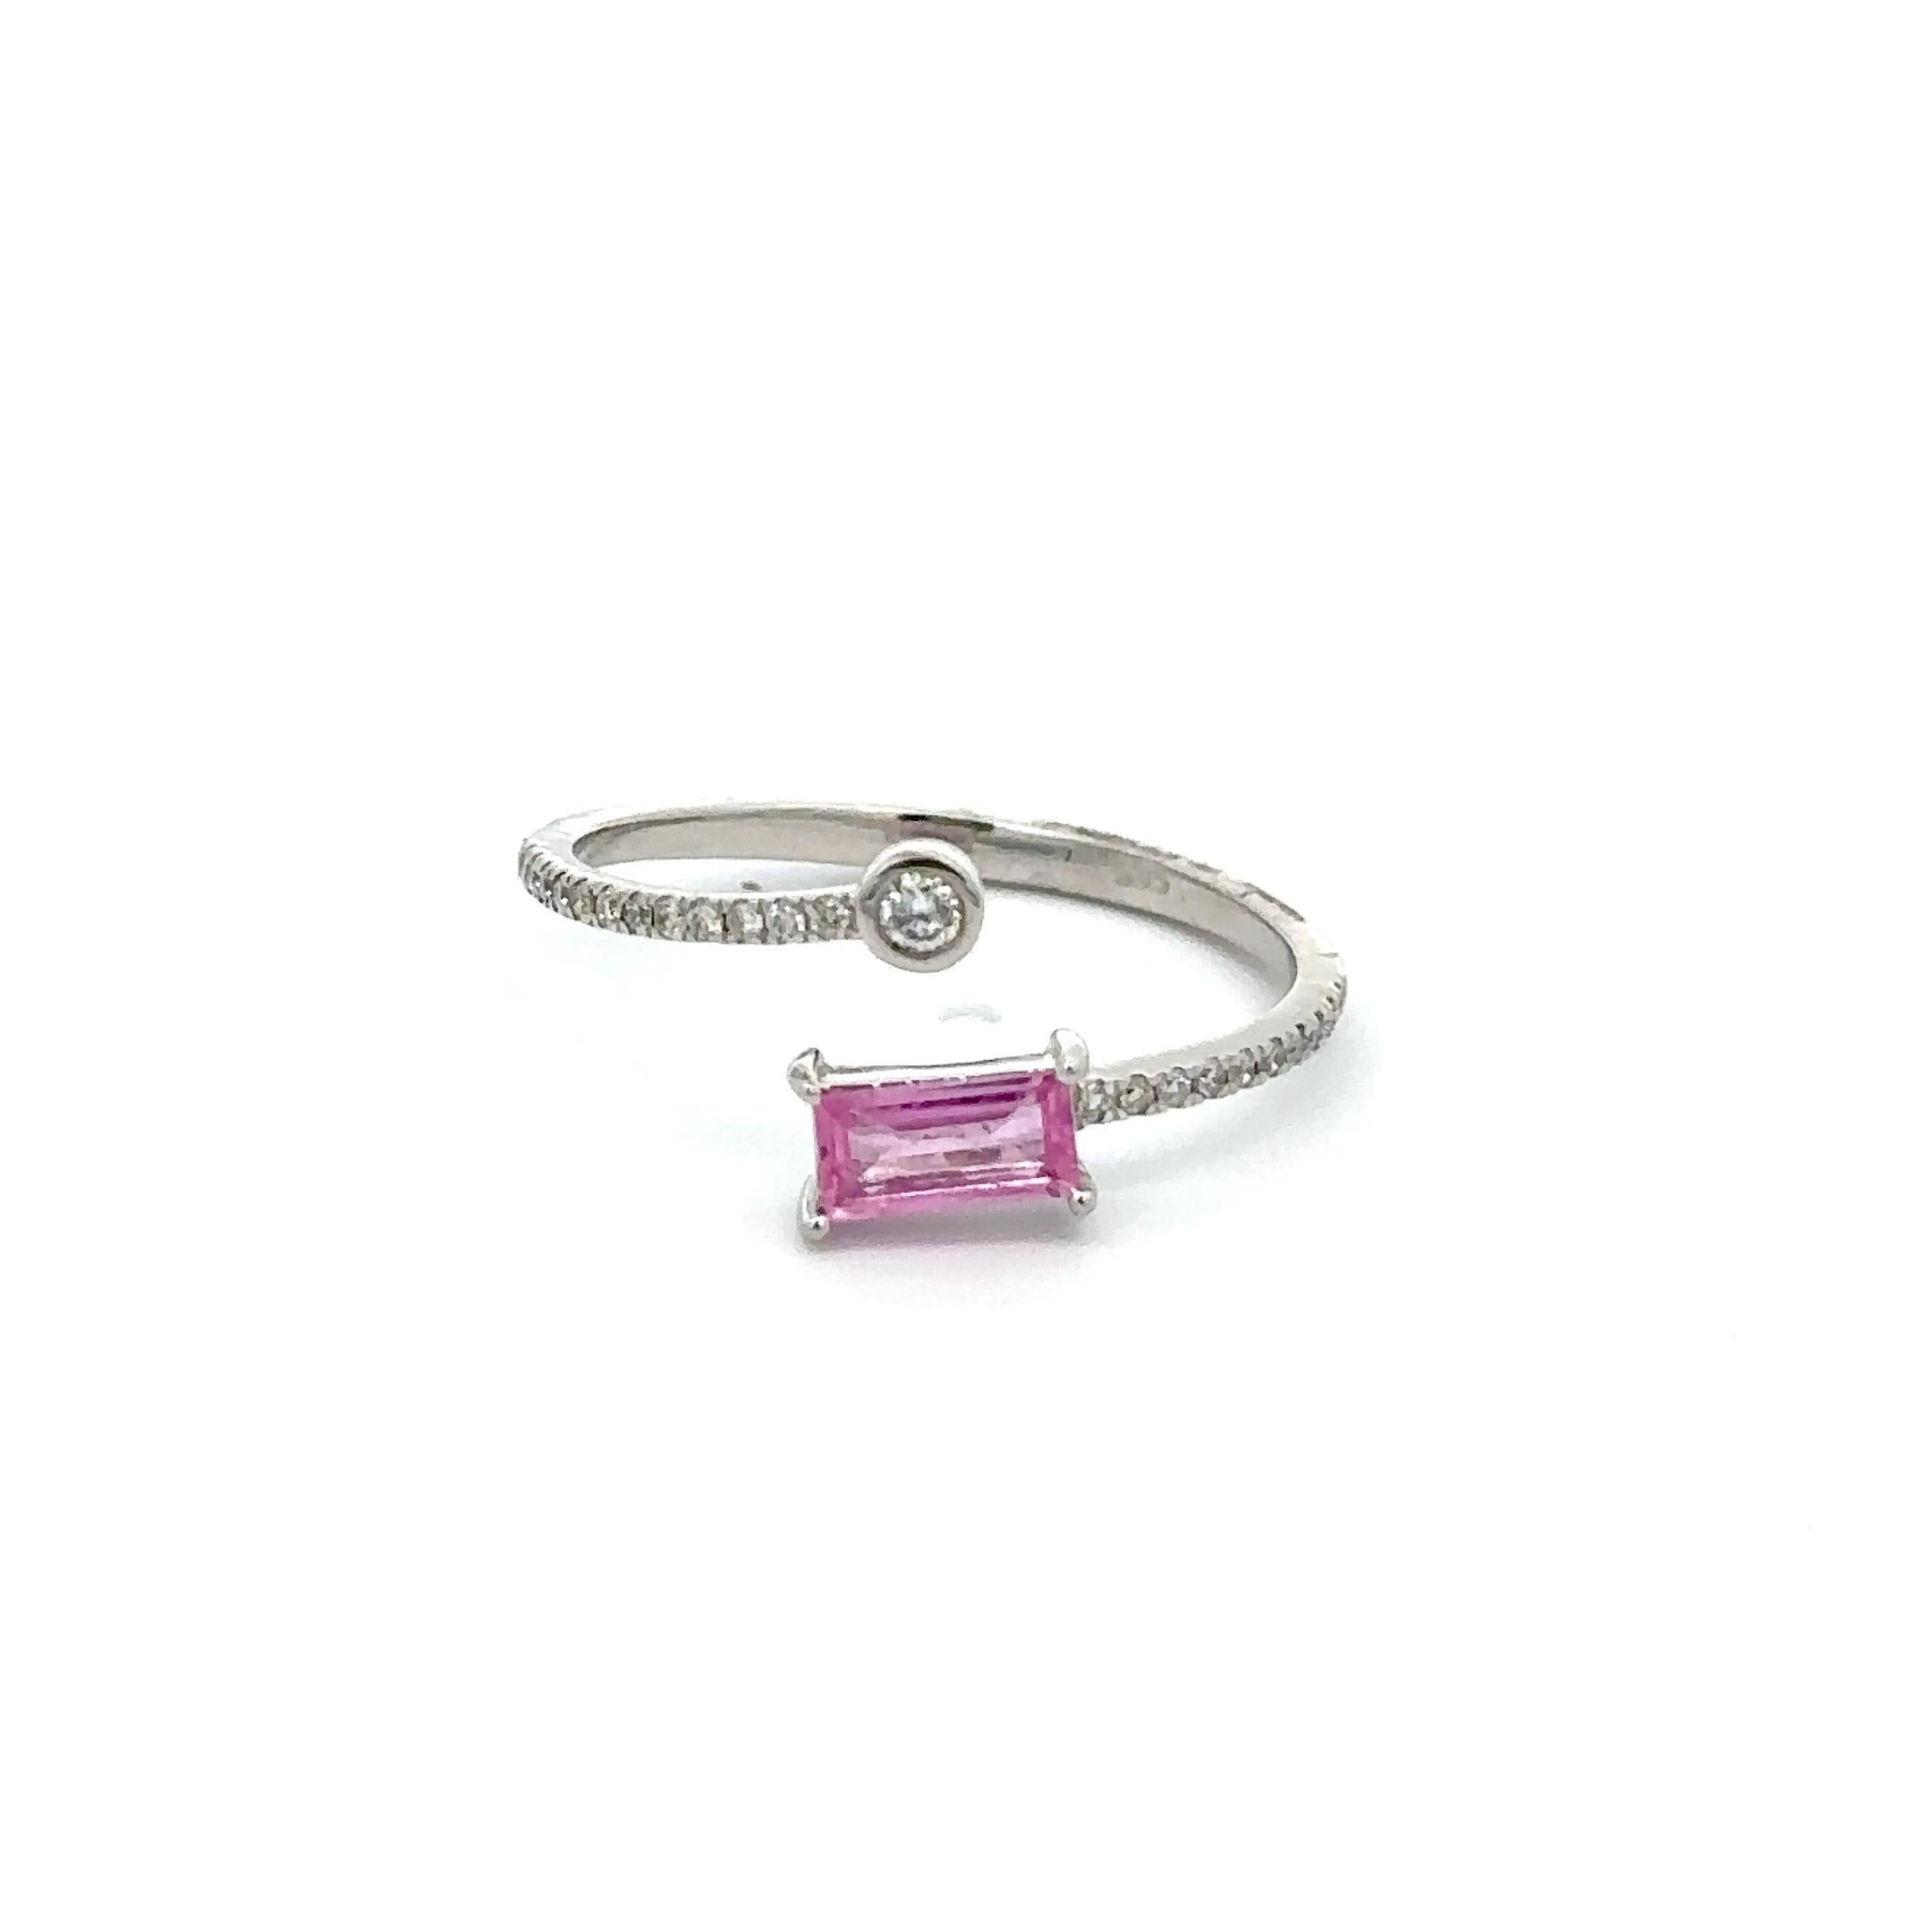 For Sale:  Minimalist Open Ended Ring with Baguette Cut Pink Sapphire and Diamond 2